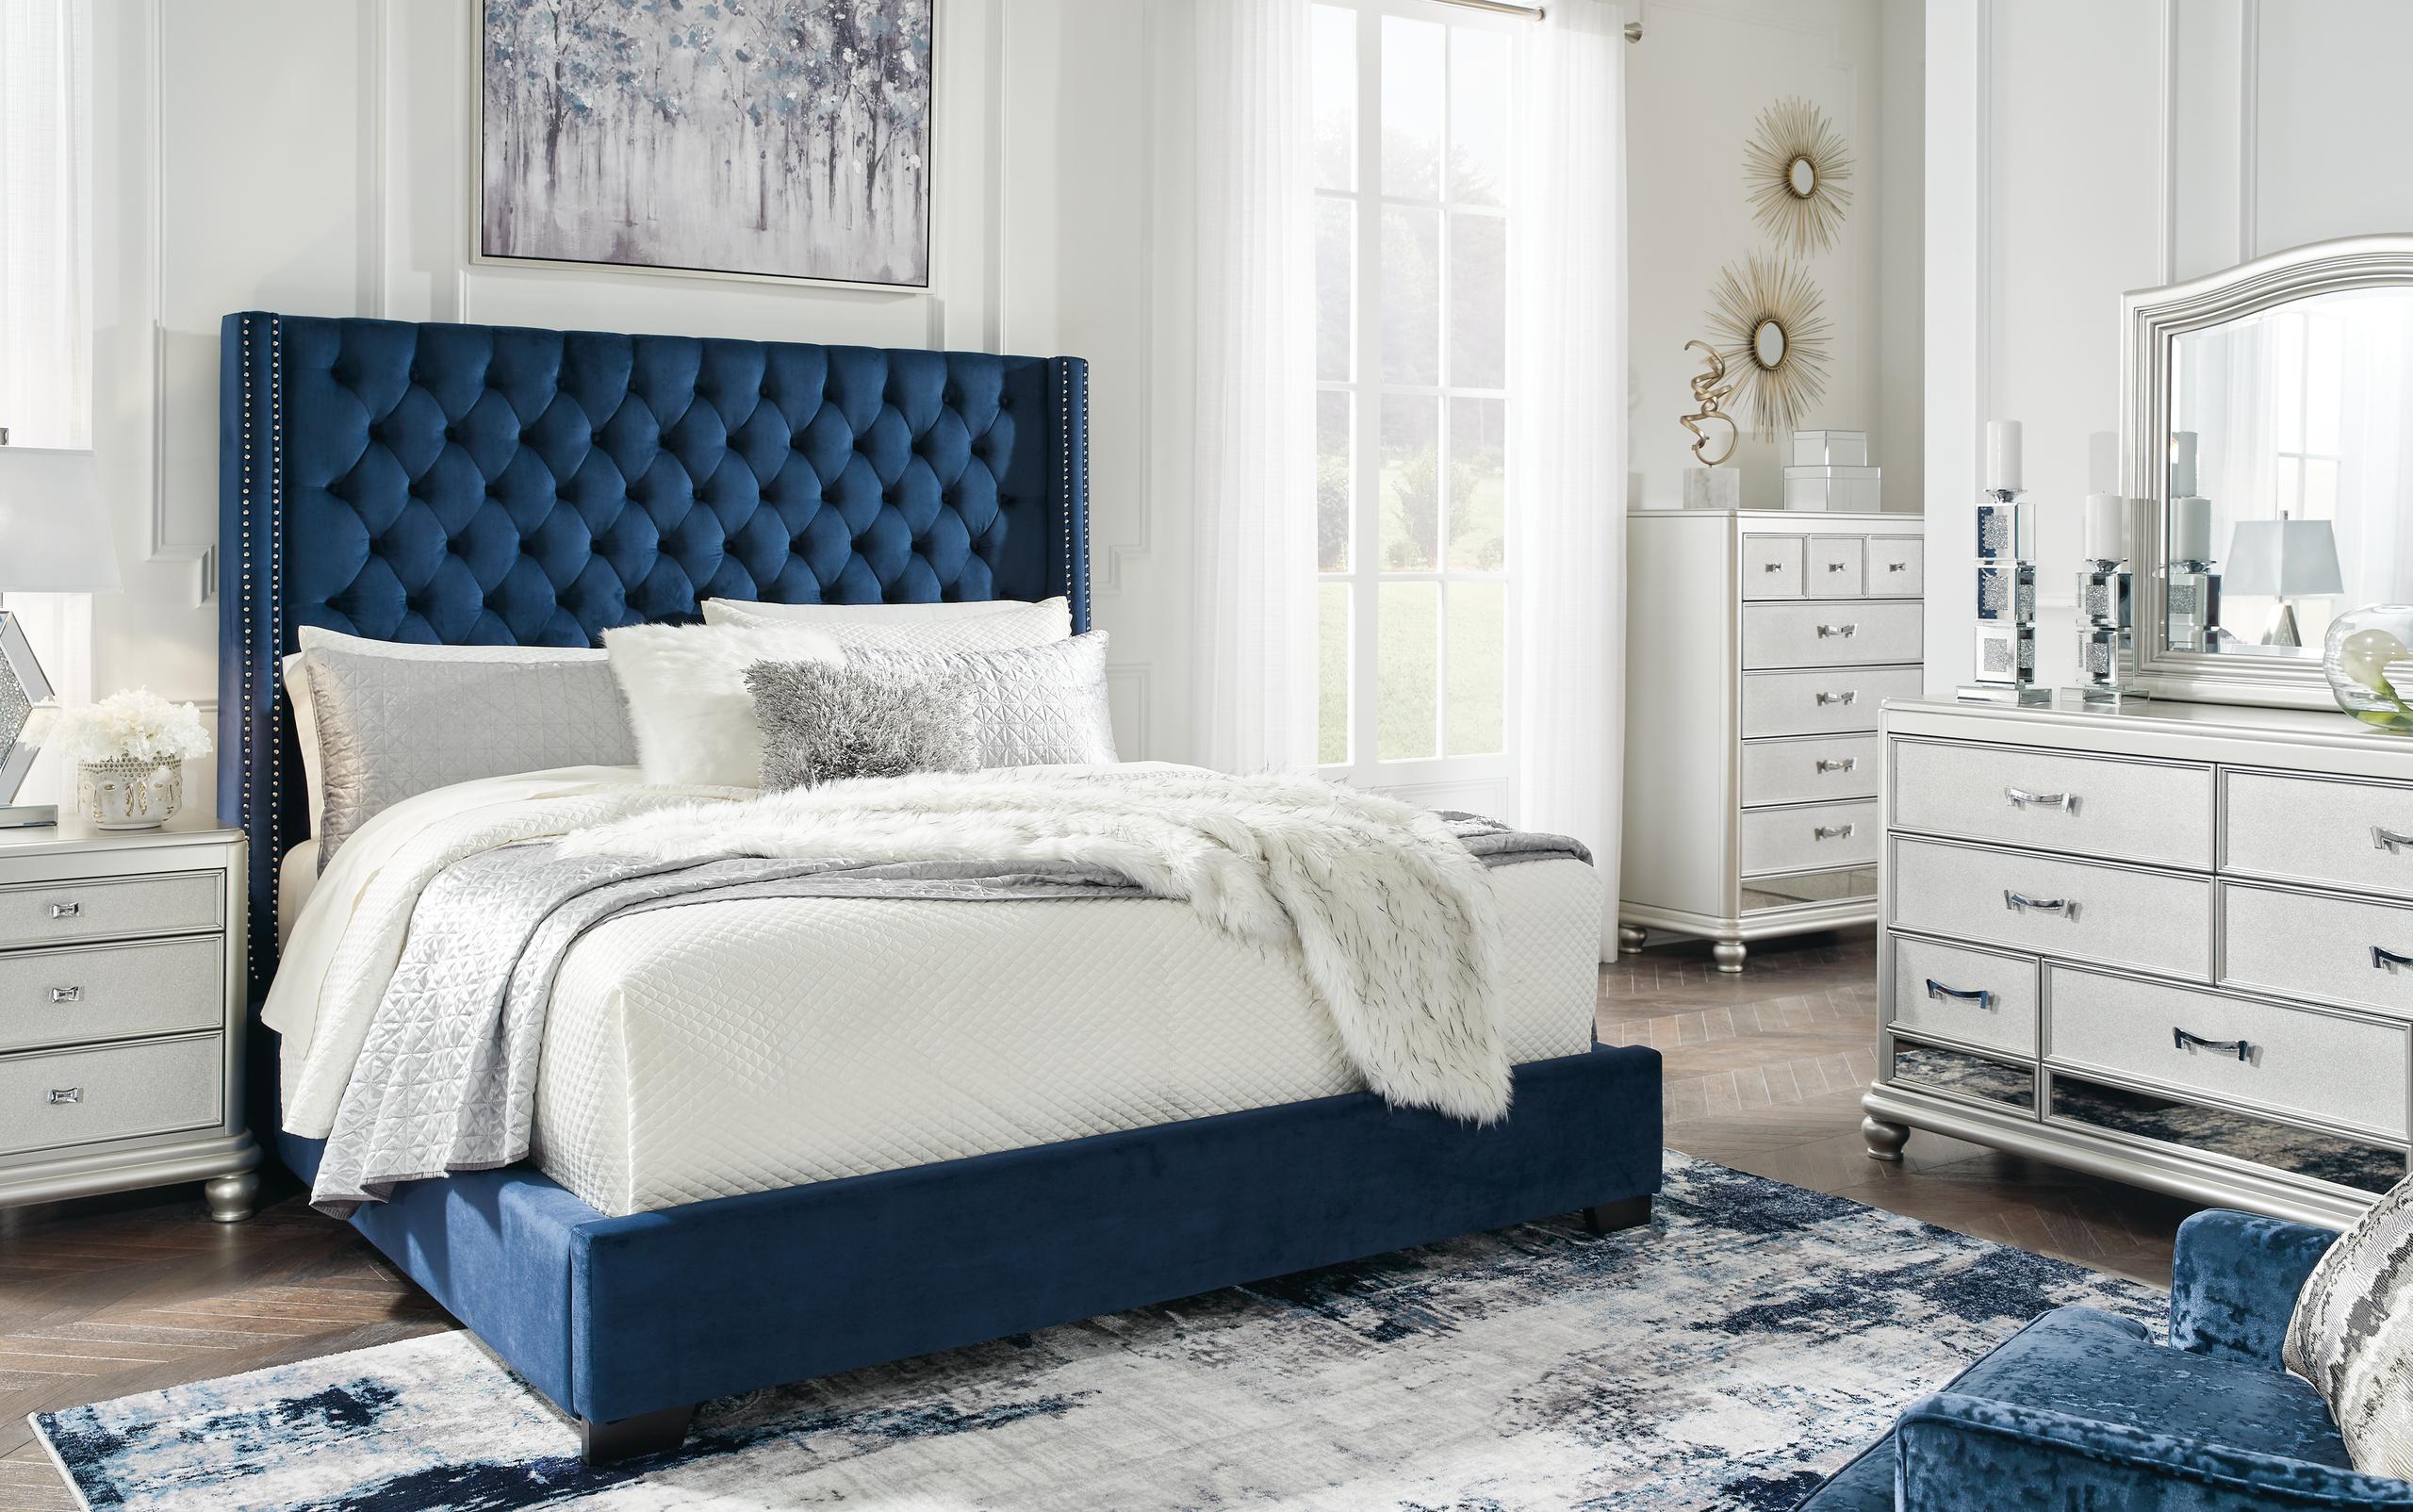 ASHLEY FURNITURE B650B23 Coralayne Queen Upholstered Bed